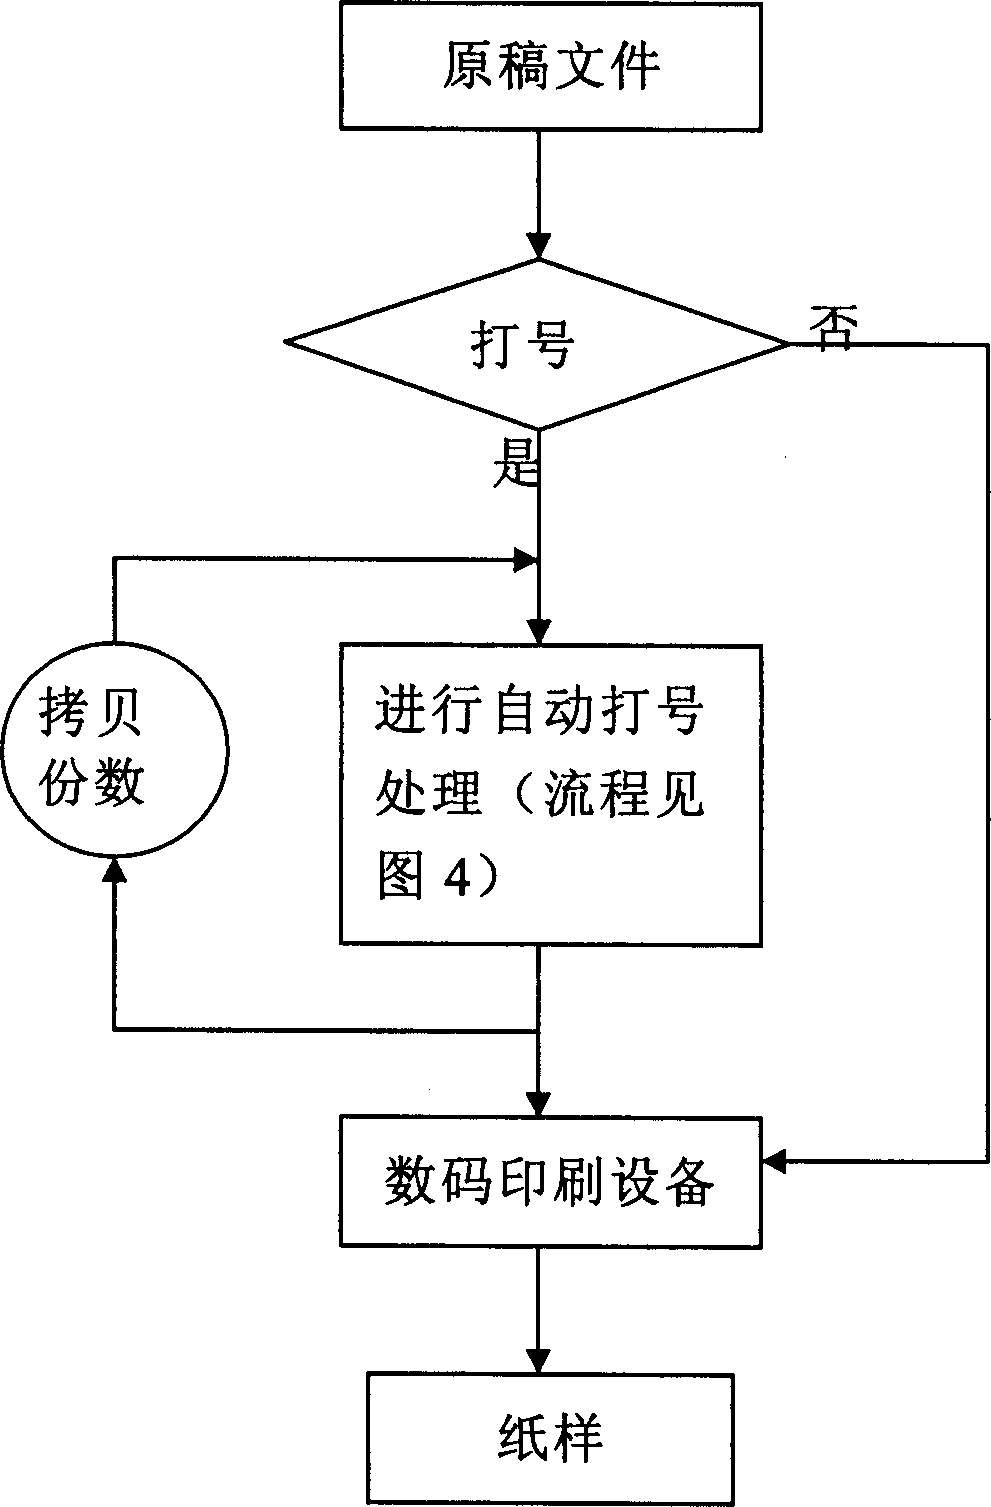 Processing method for automatic marking